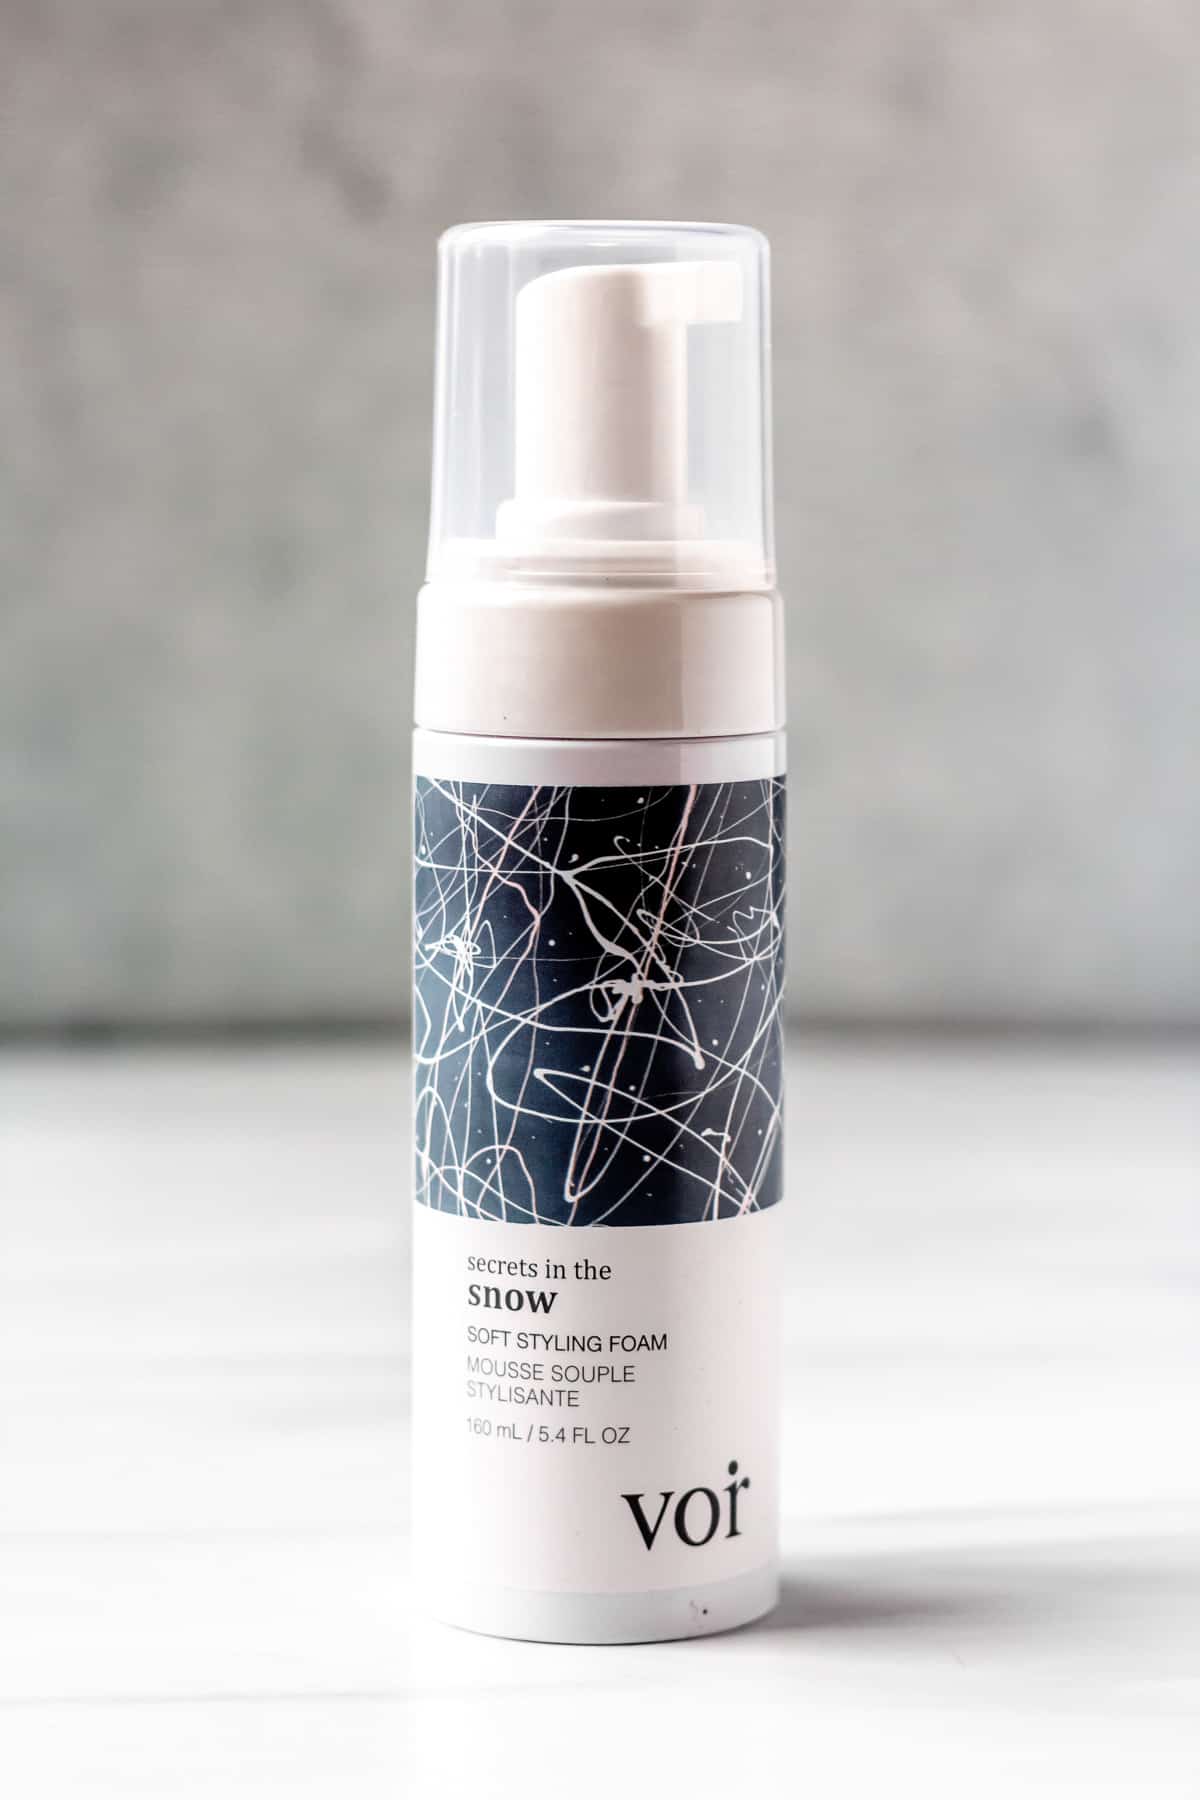 Voir Haircare Secrets In The Snow Soft Styling Foam bottle on a white and gray background.